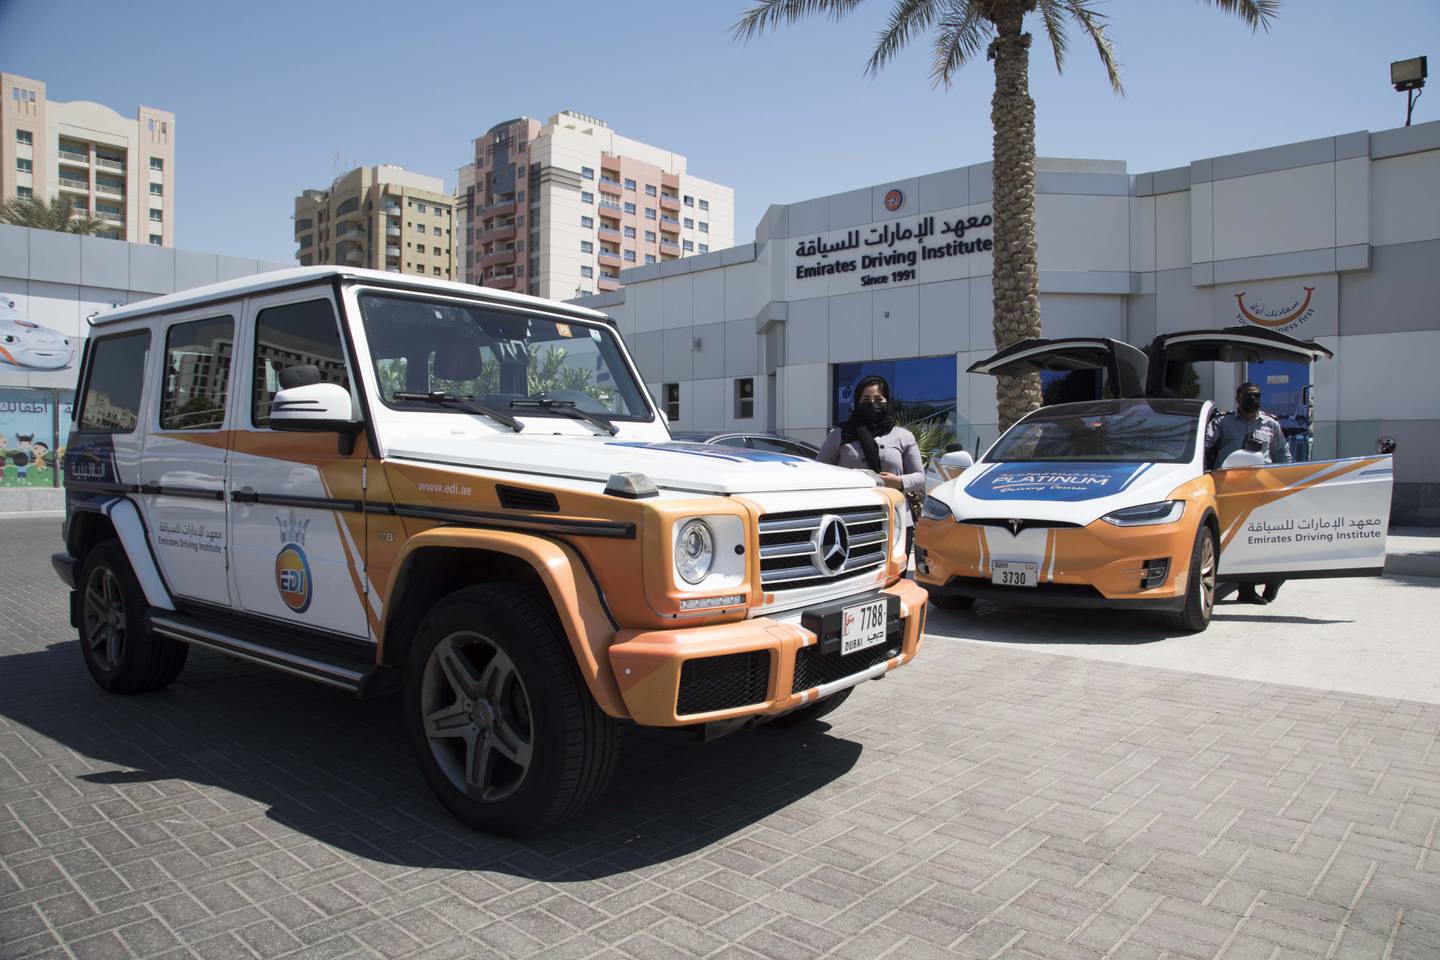 Dubai, United Arab Emirates - A Mercedes and Tesla at the Emirates Driving Institute, Dubai. Leslie Pableo for The National